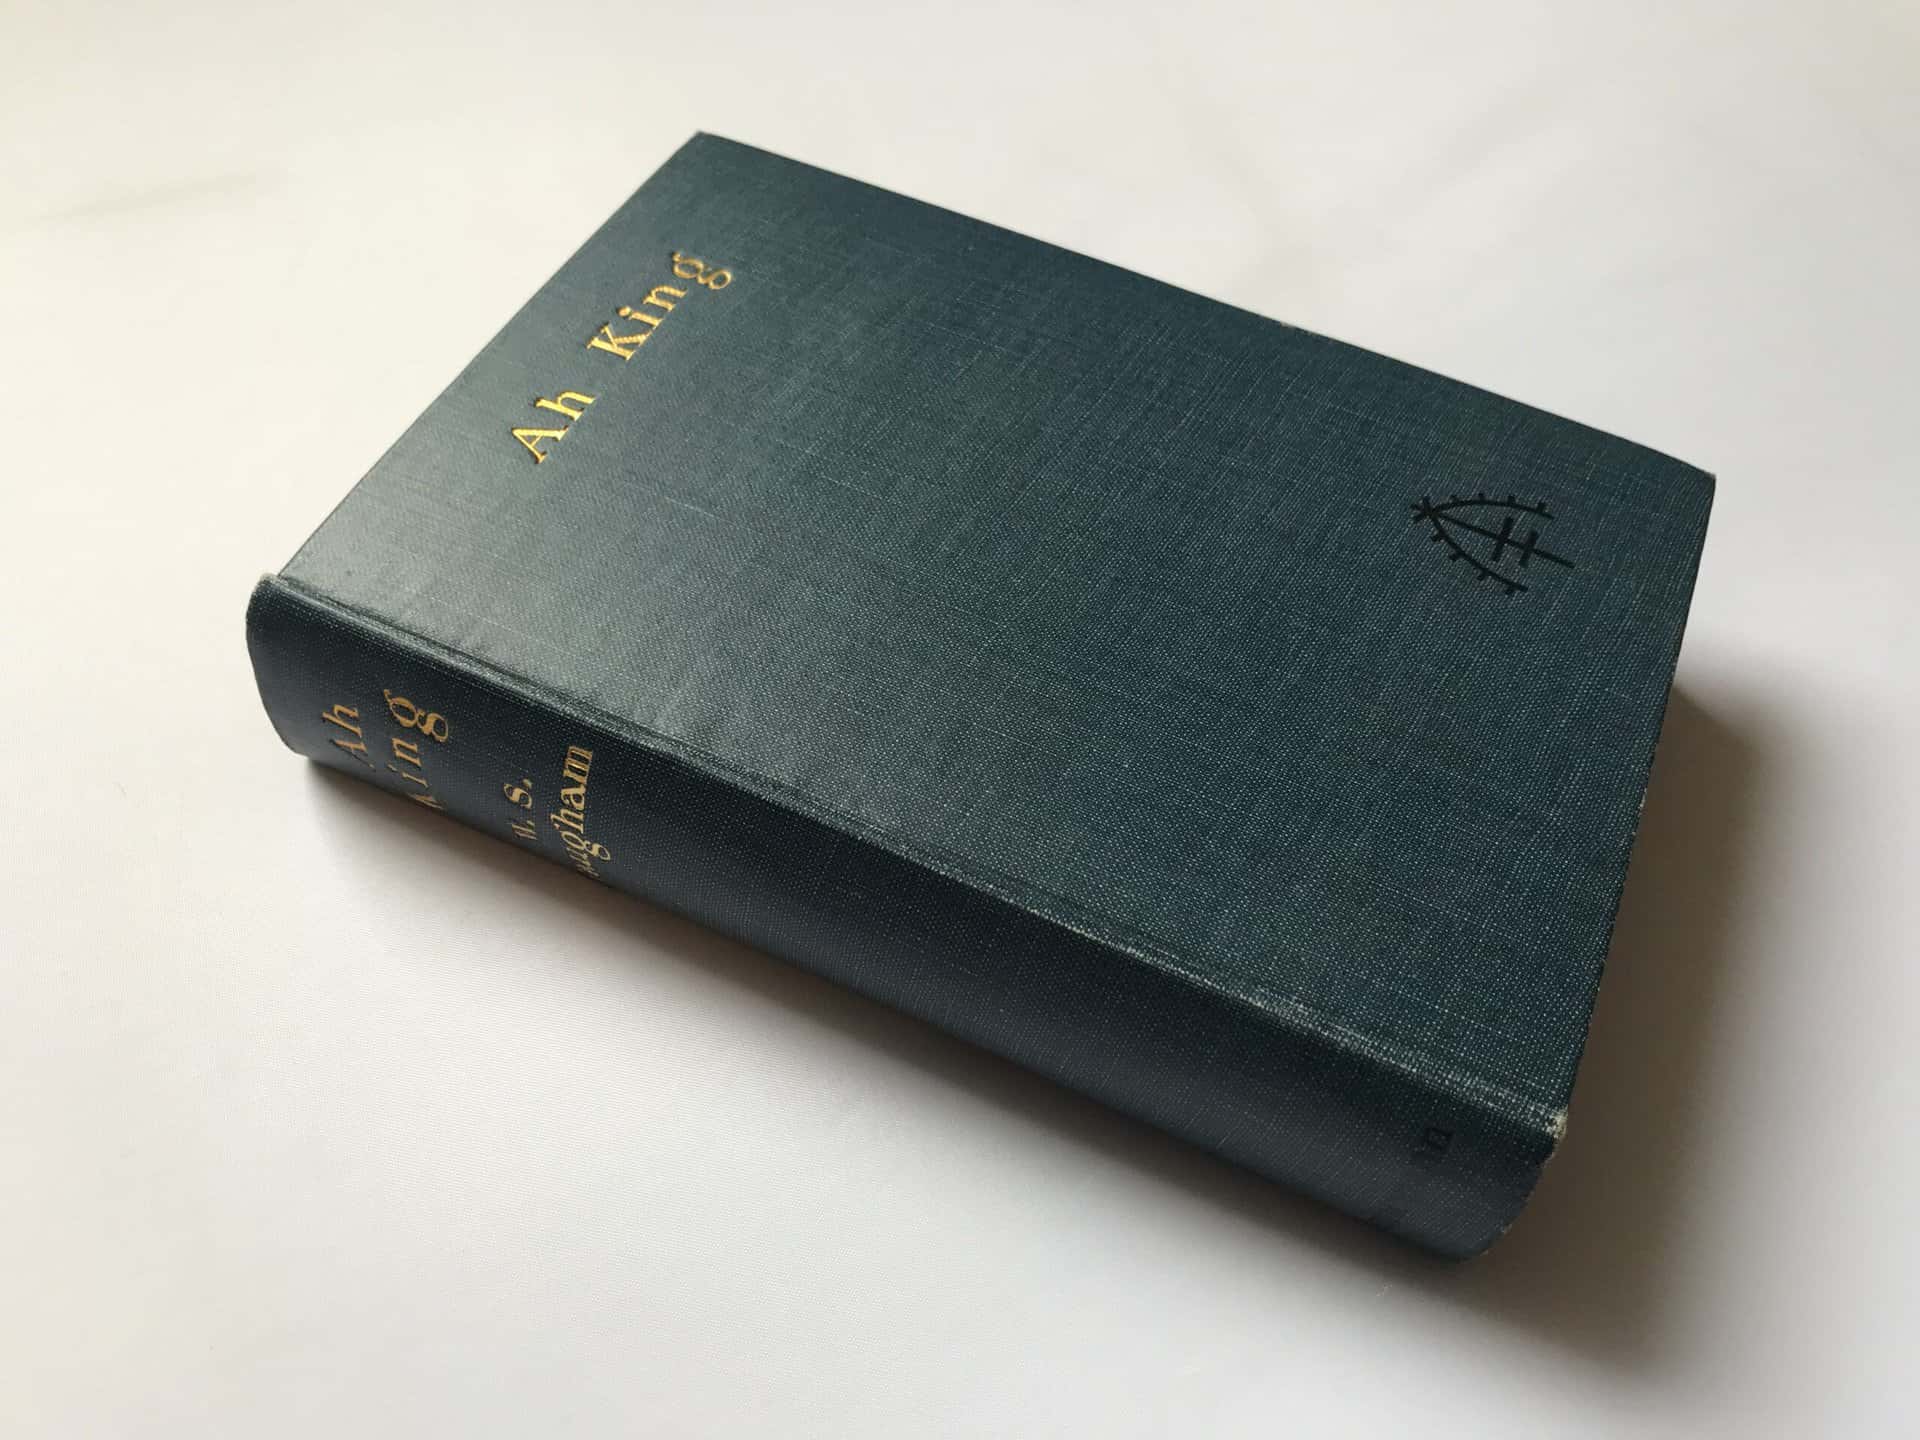 w somerset maugham ah king signed first edition3